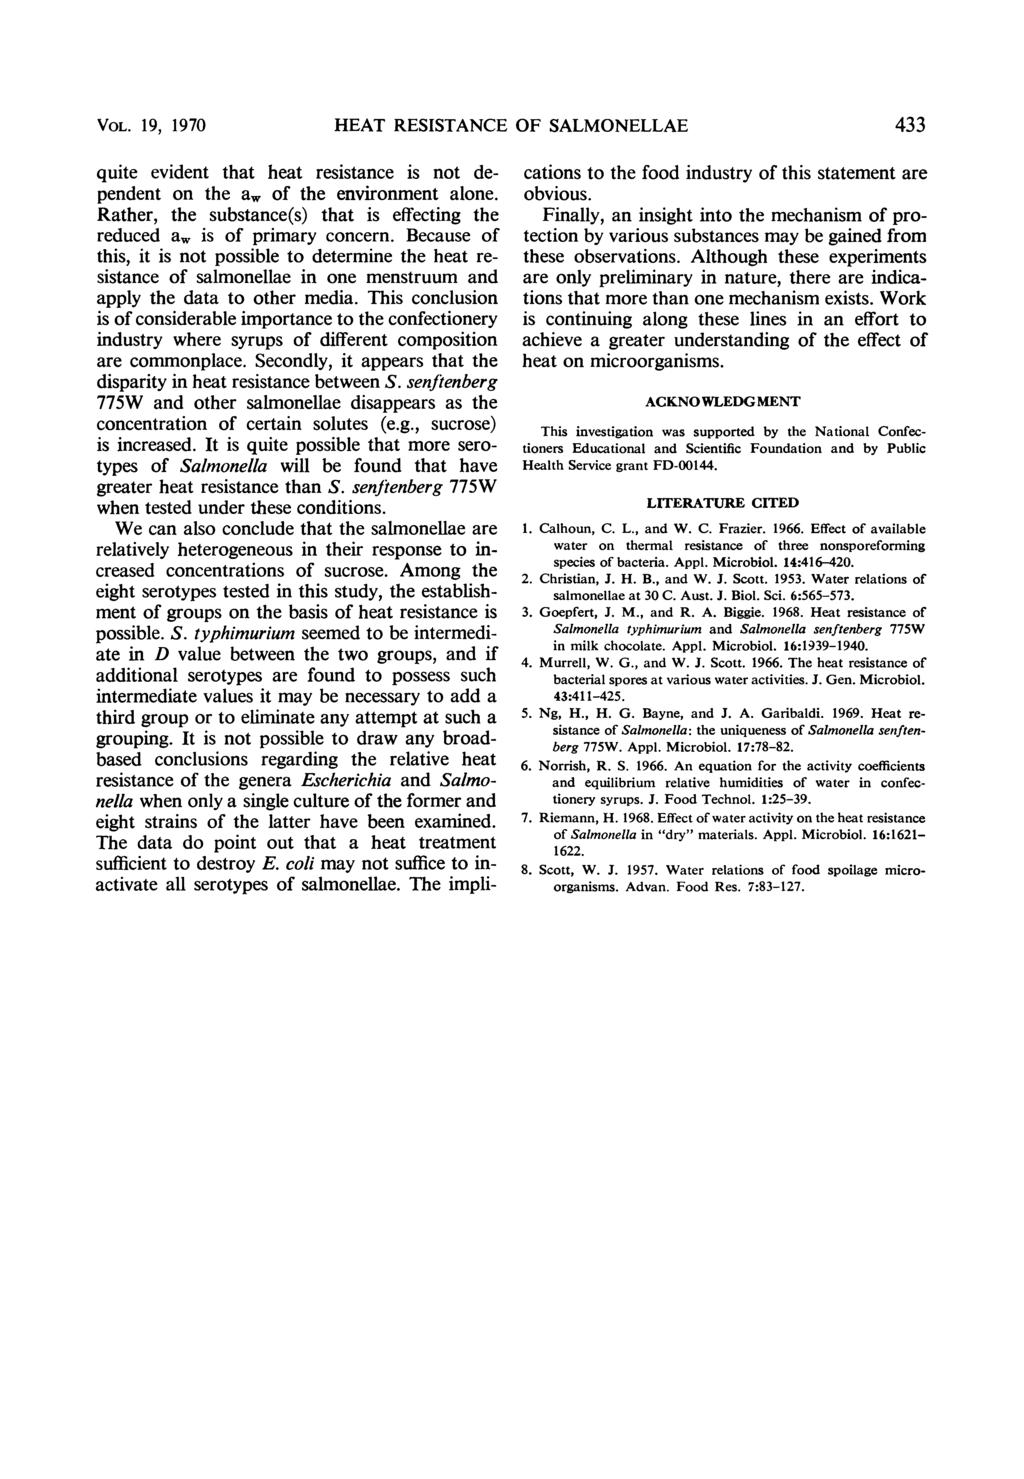 VOL. 19, 19 70 HEAT RESISTANCE OF SALMONELLAE quite evident that heat resistance is not dependent on the a, of the environment alone.